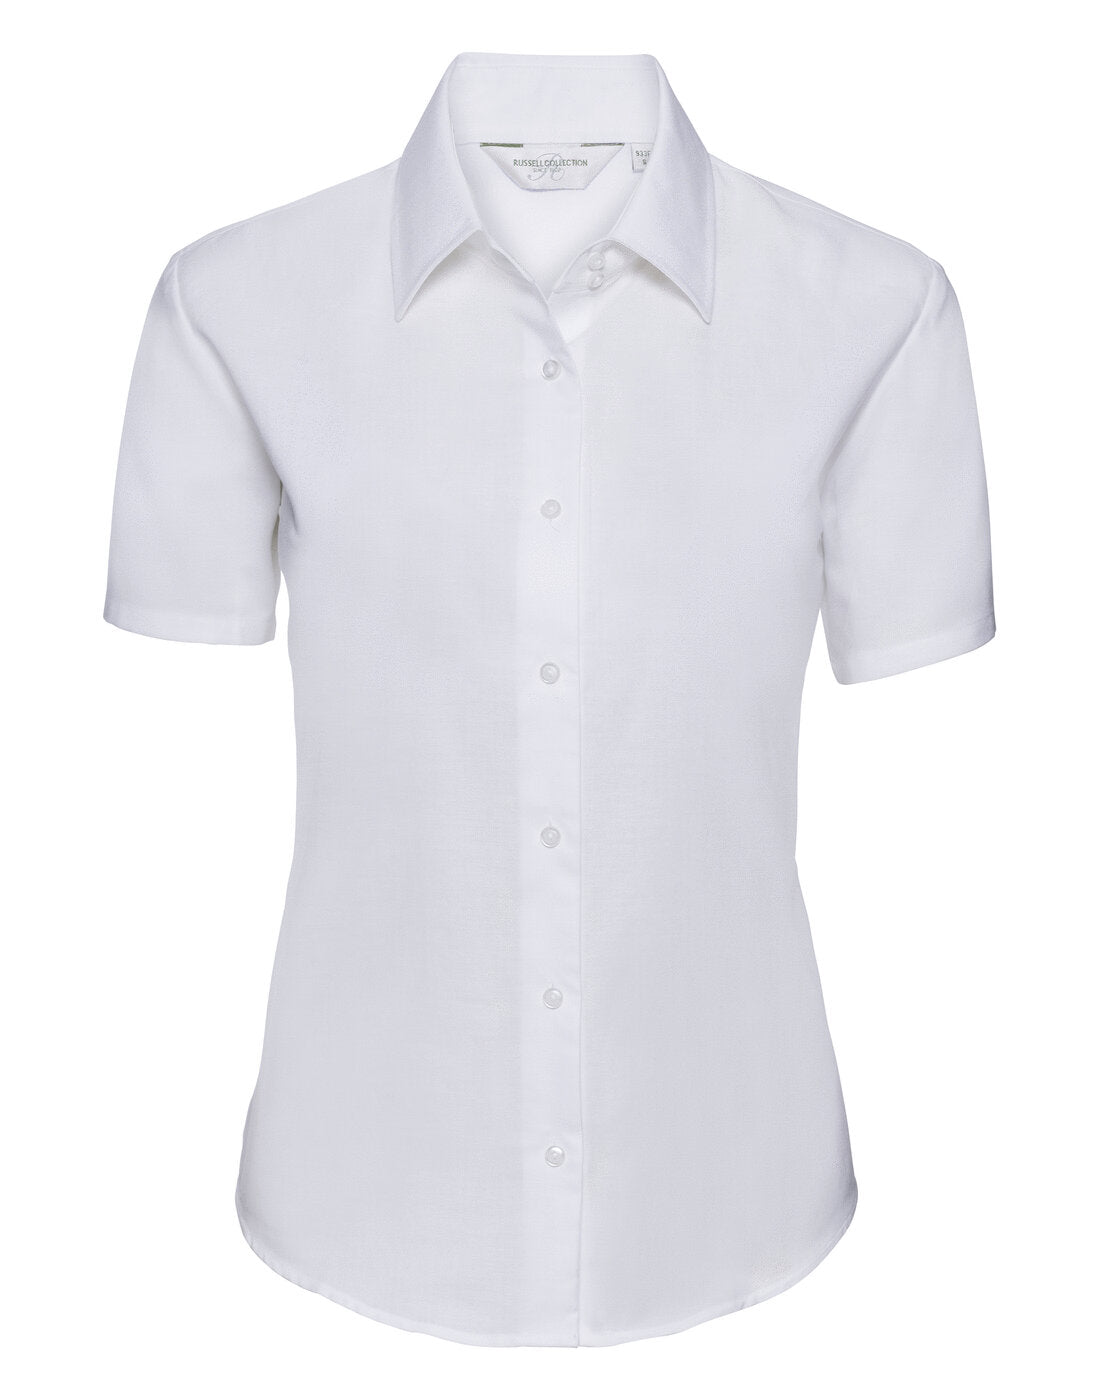 Russell Ladies Short Sleeve Tailored Oxford Shirt White